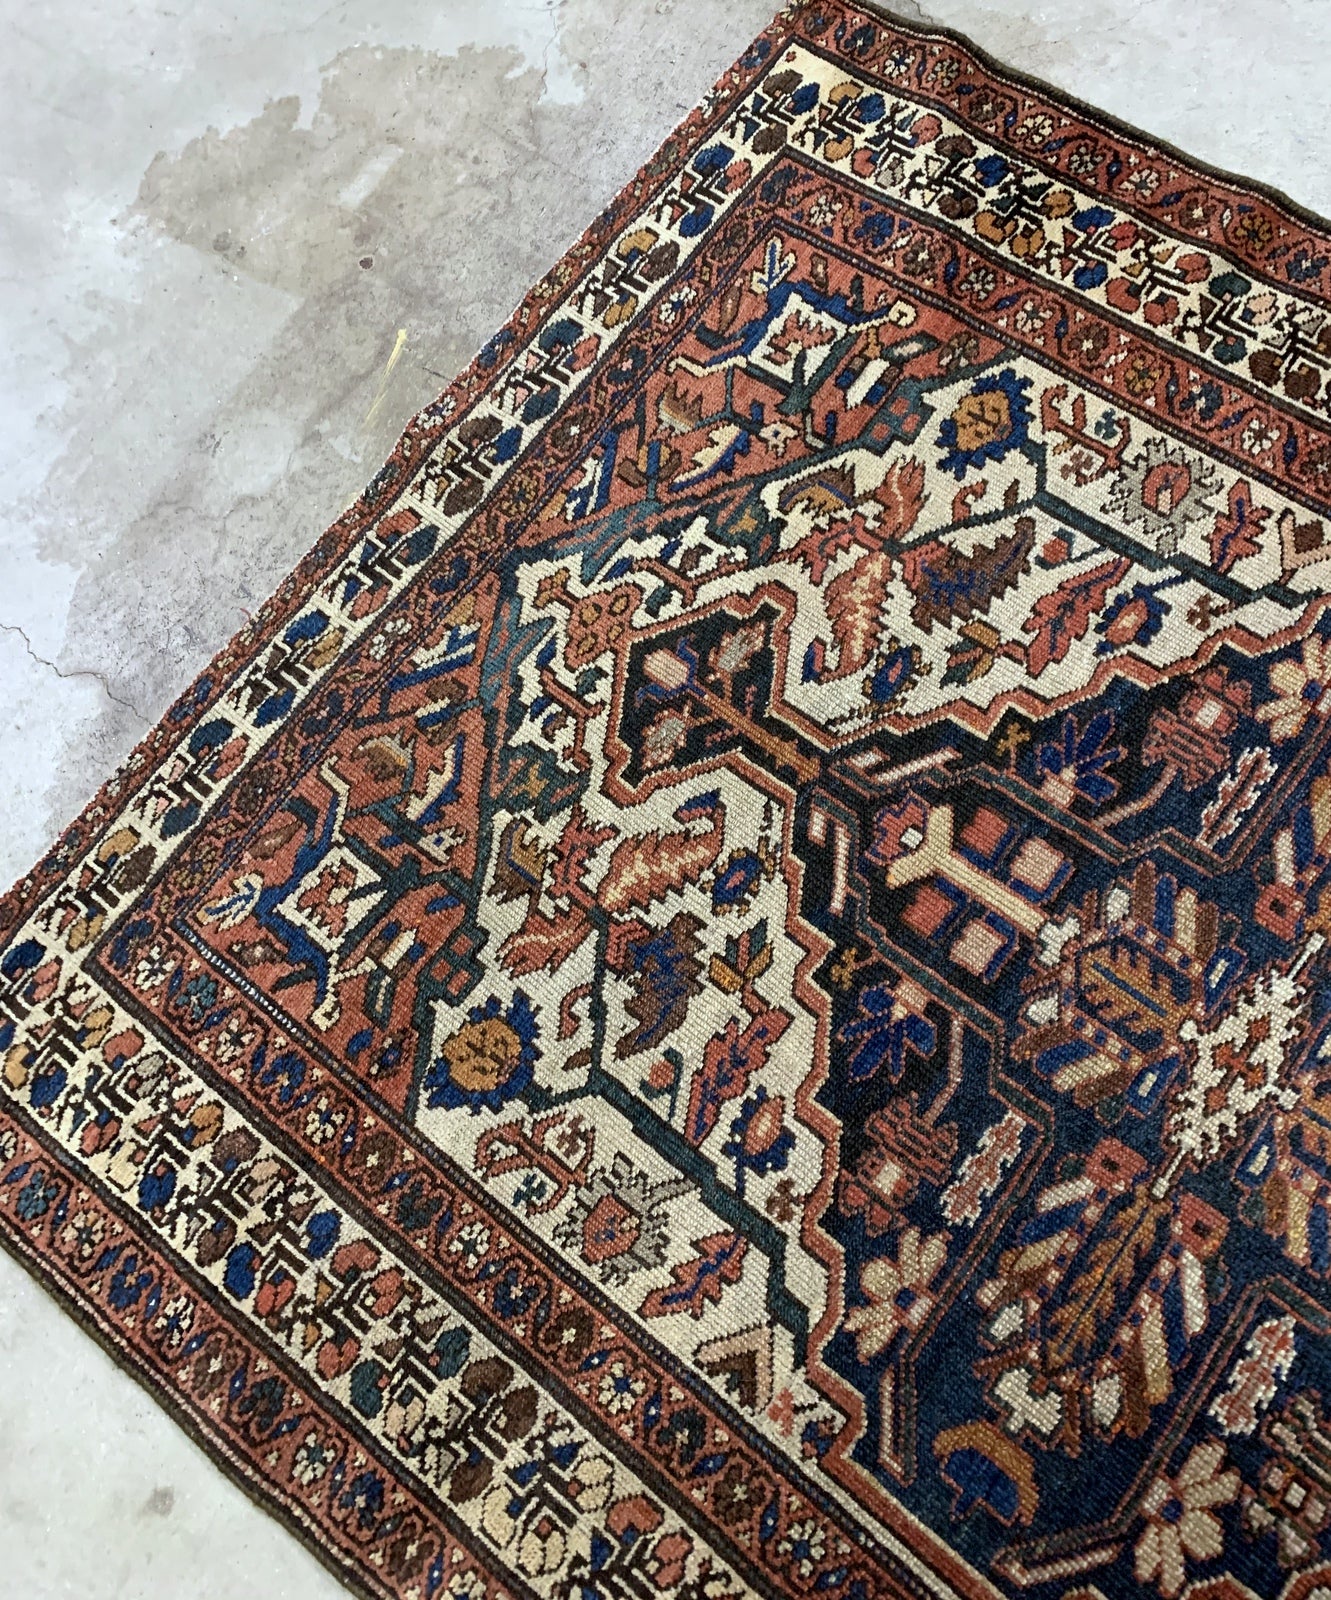 Handmade antique Middle Eastern Malayer rug in traditional design. The rug is from the beginning of 20th century in original good condition.